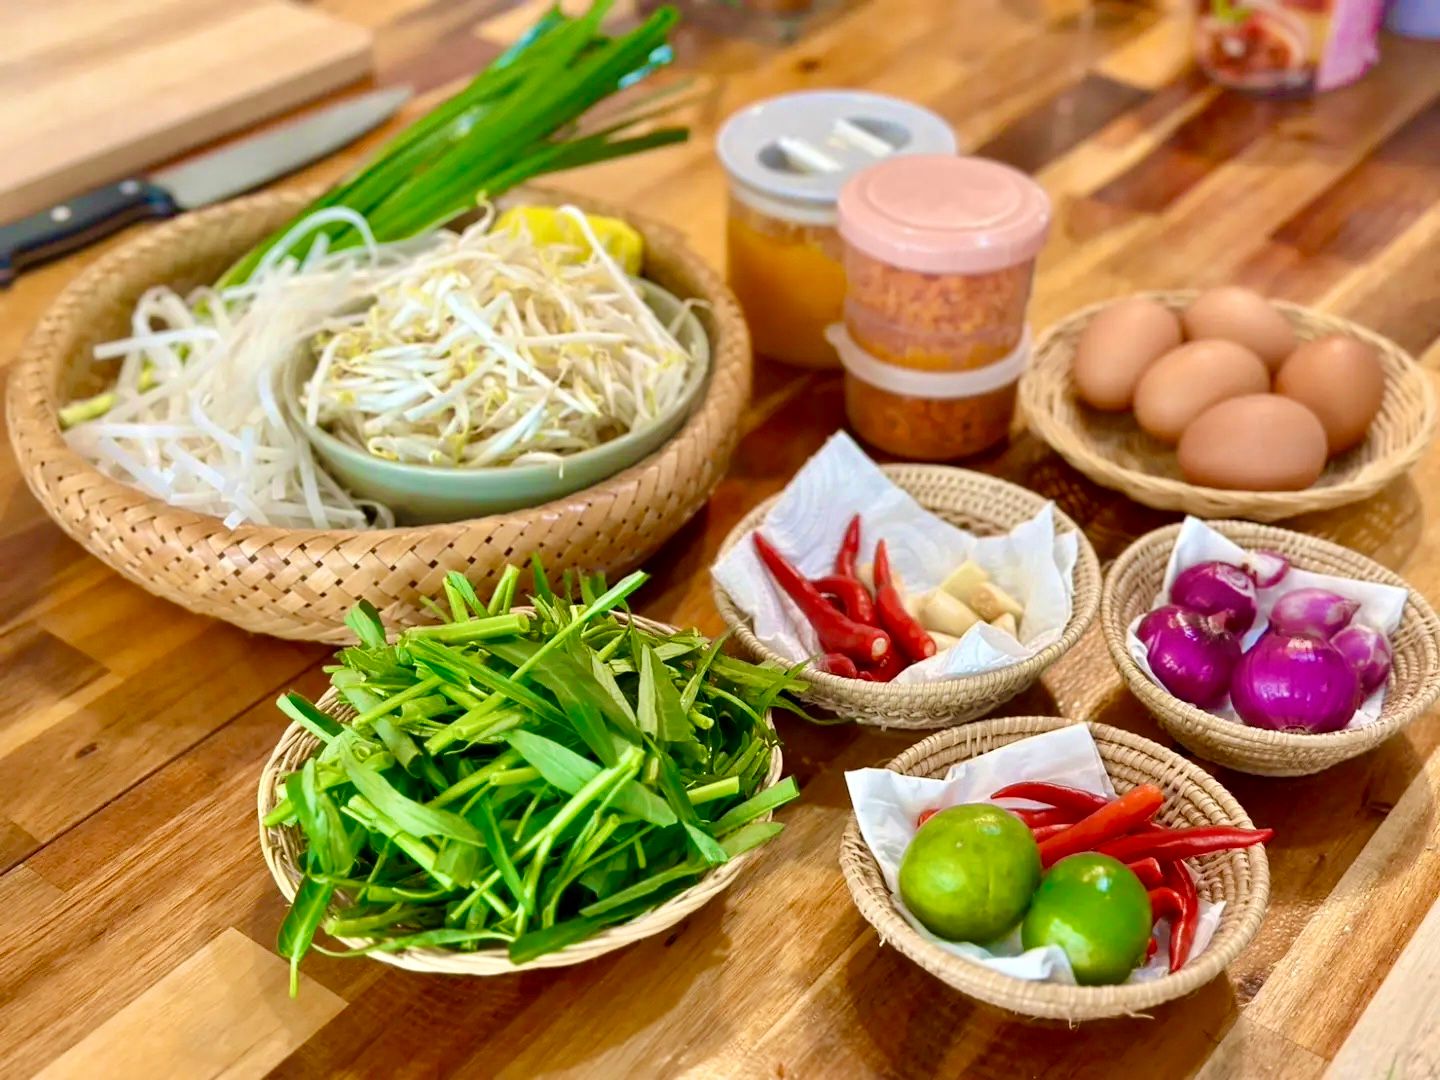 During this captivating experience, you'll explore the nuances of Thai herbs and seasonings.